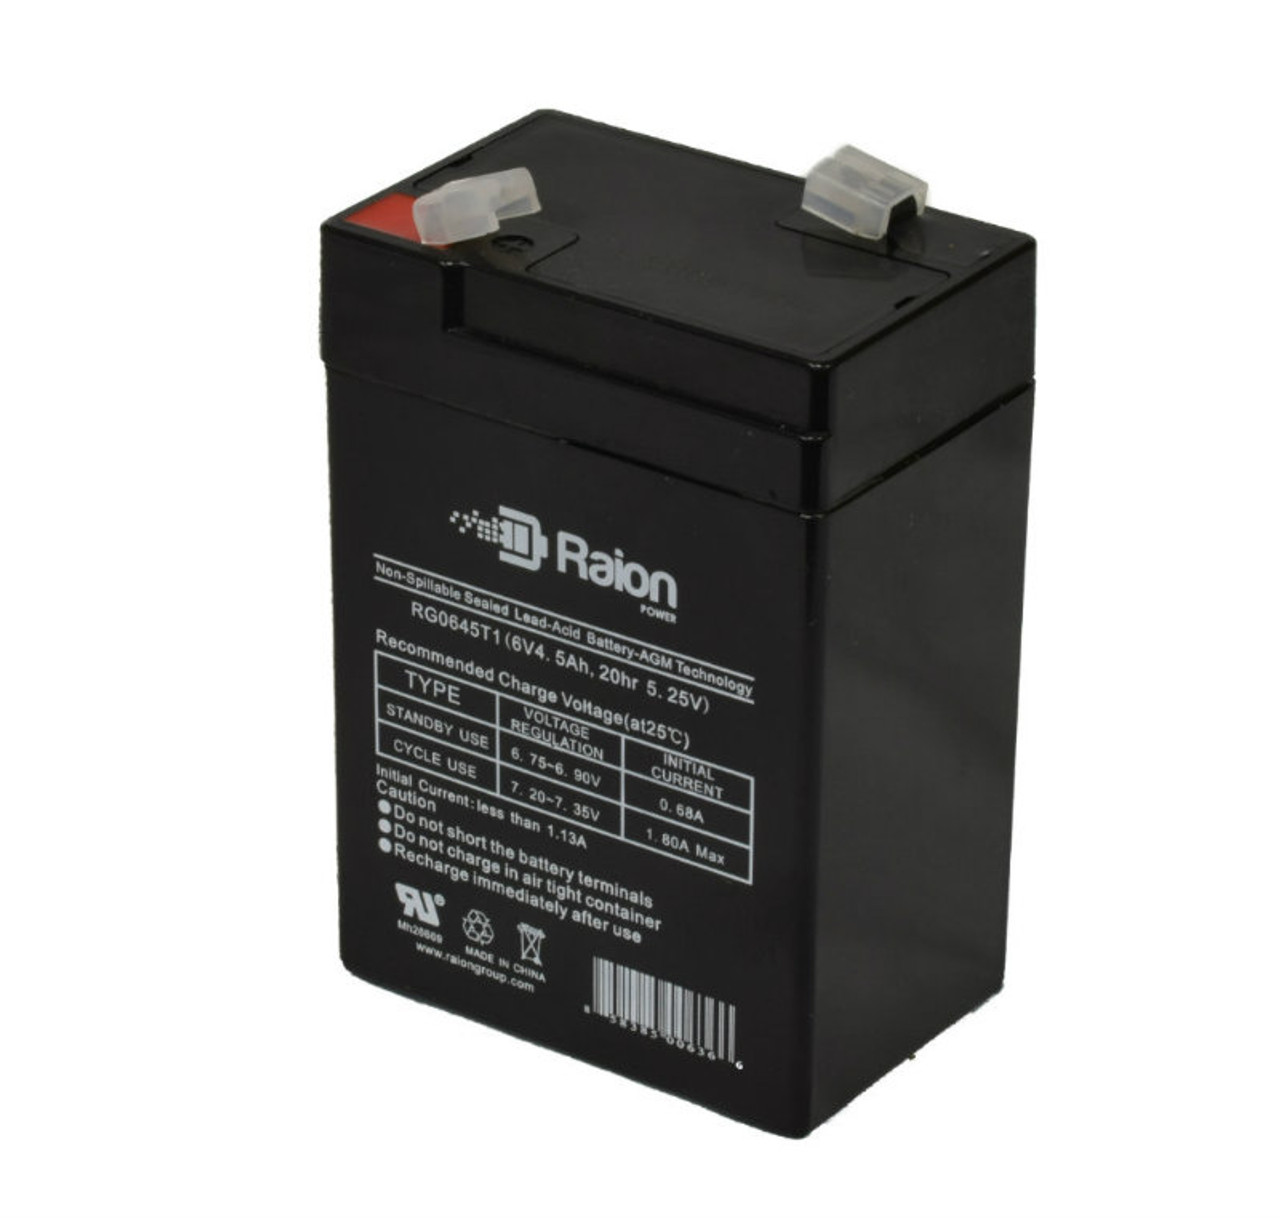 Raion Power RG0645T1 6V 4.5Ah Replacement Battery Cartridge for Motoma MS6V4.5S